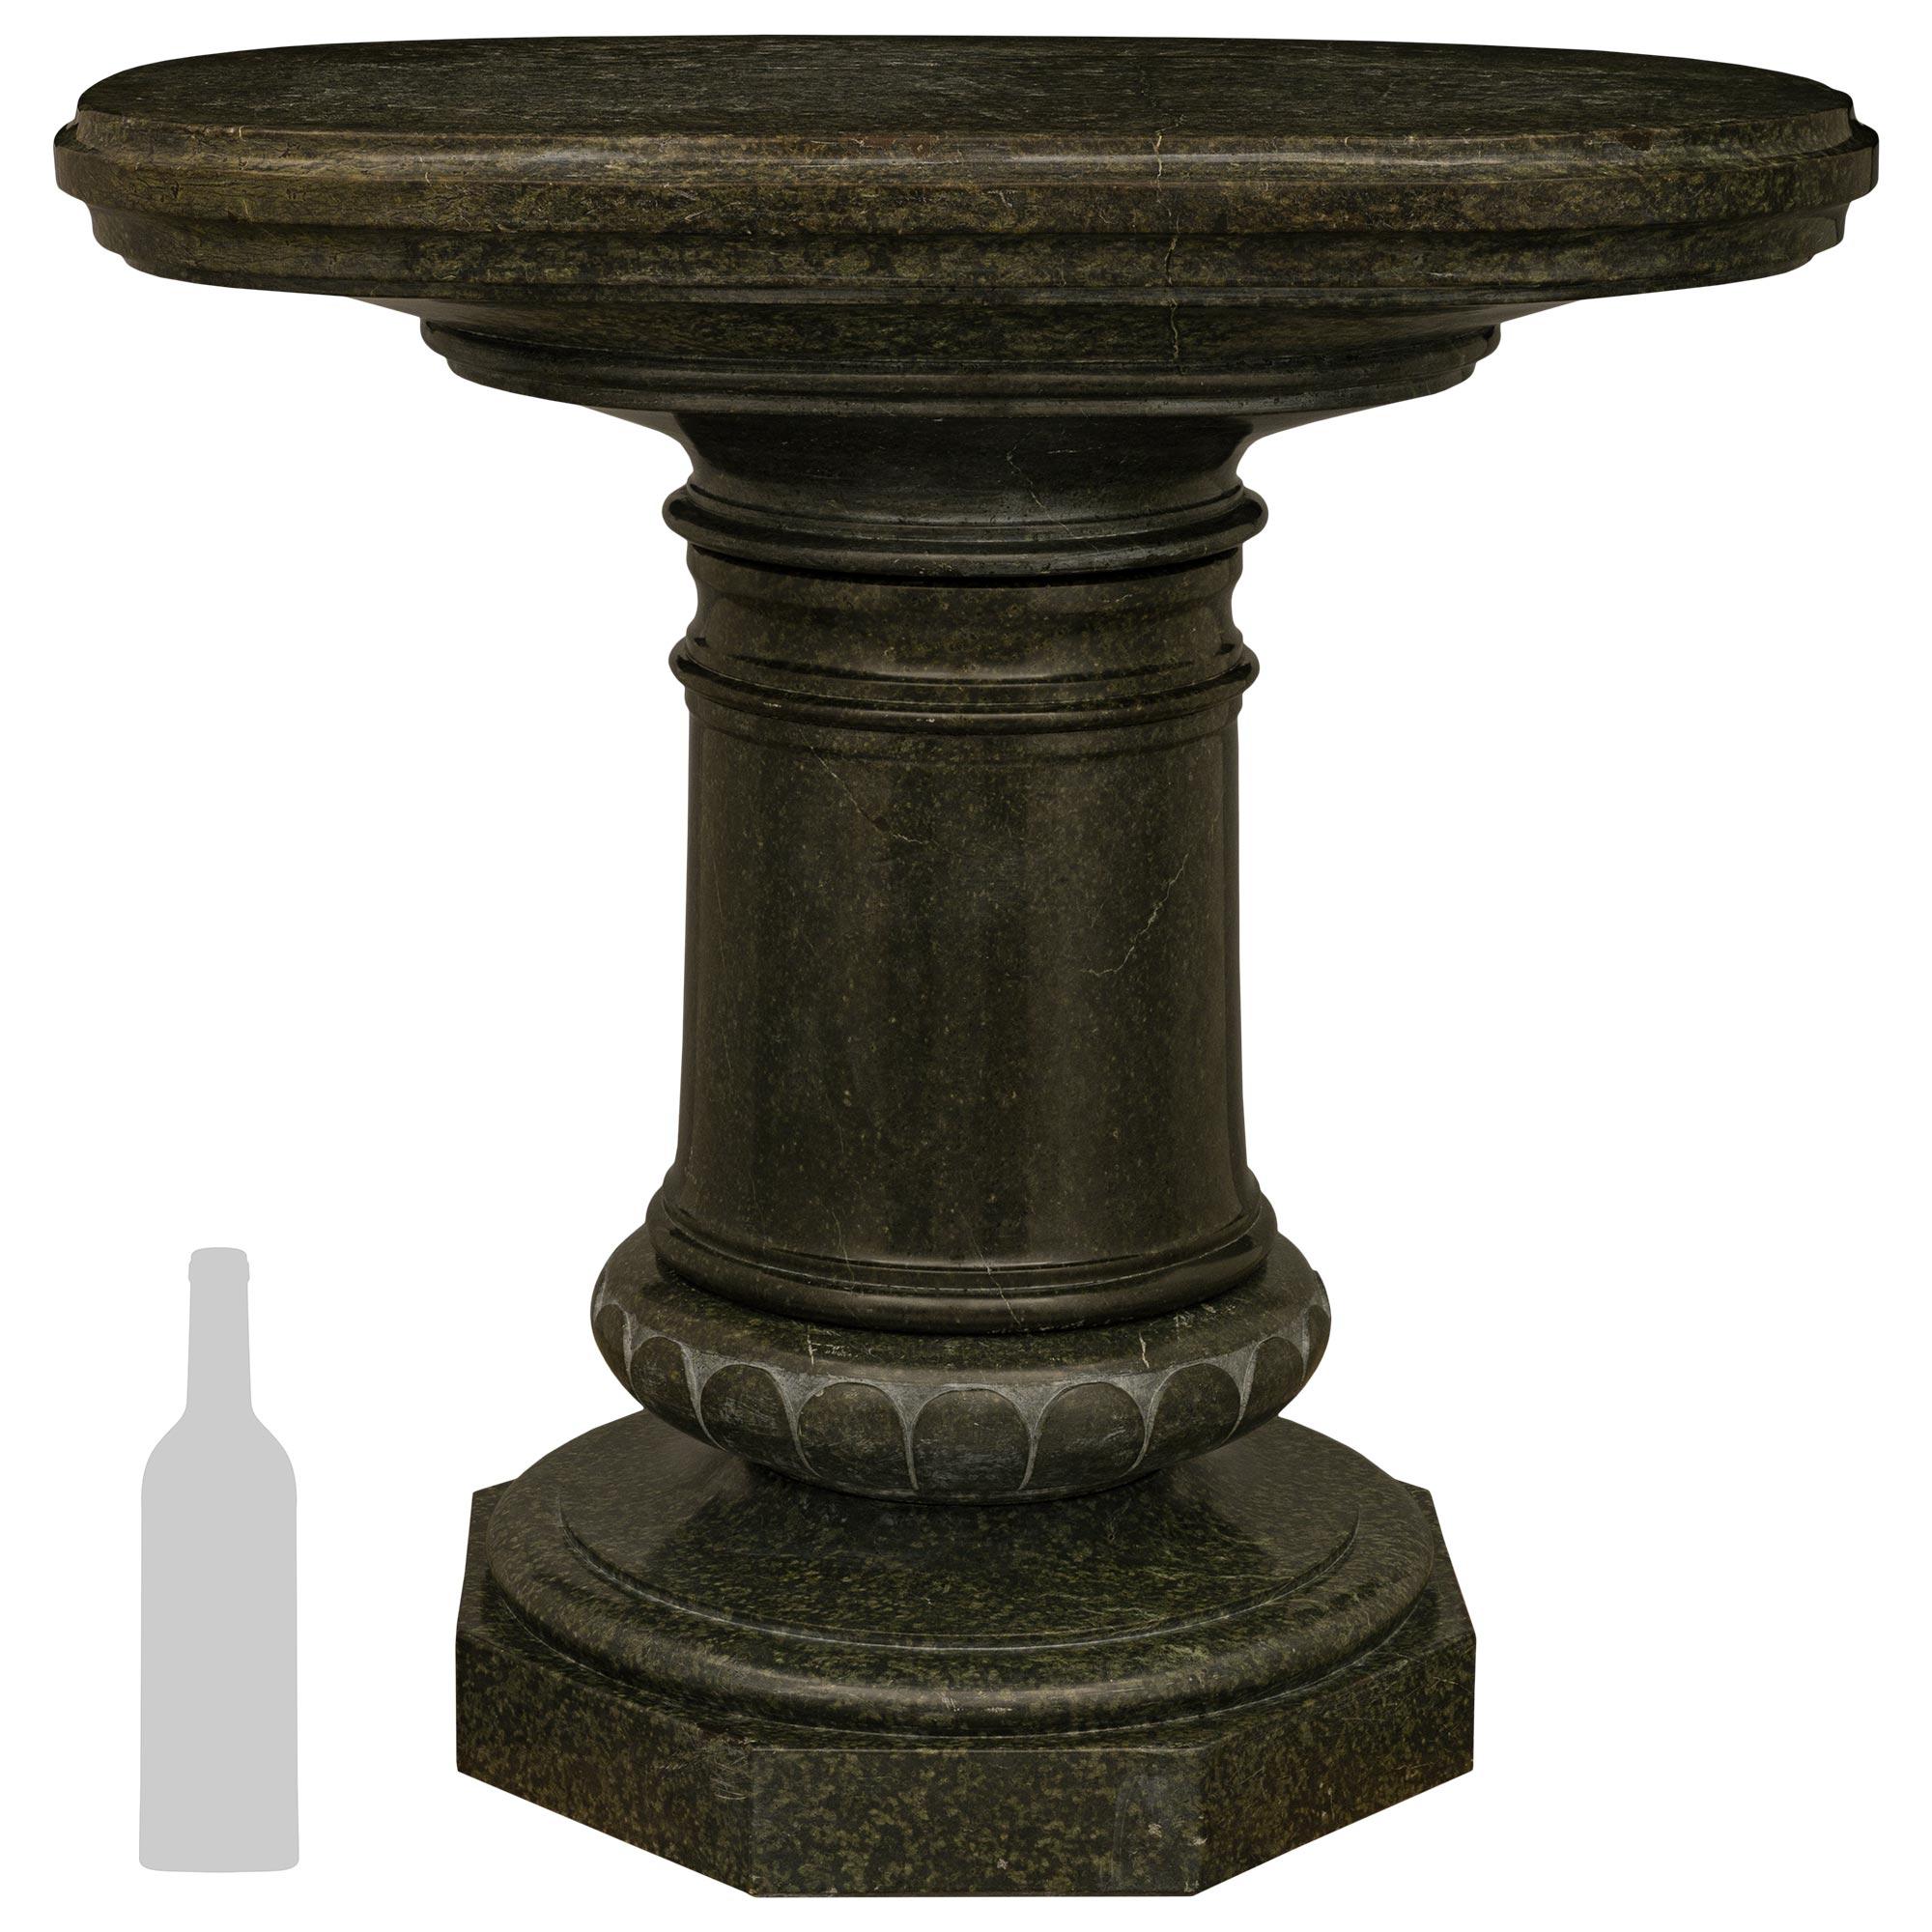 A very handsome and most impressive Italian 19th century Serpentine marble pedestal. This large scale pedestal is raised by an octagonal base with a socle shaped circular plinth above. The top of the socle is decorated with wonderful wrap around